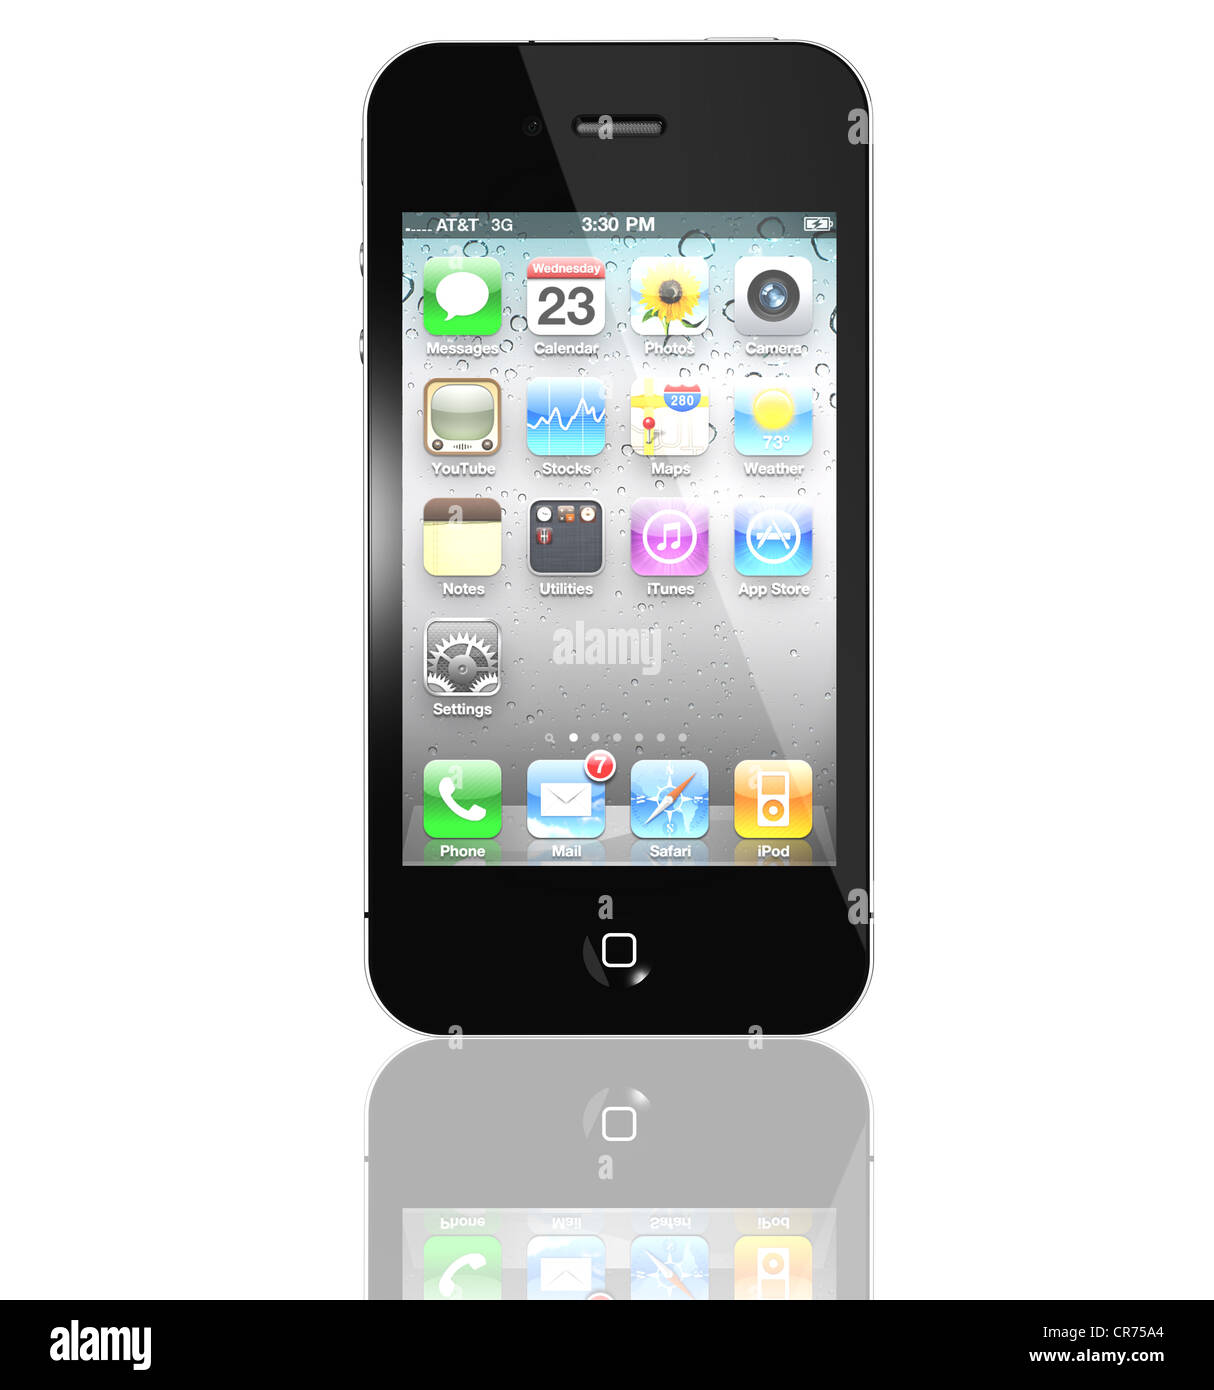 iPhone 4s with The faster dual-core A5 chip. Stock Photo